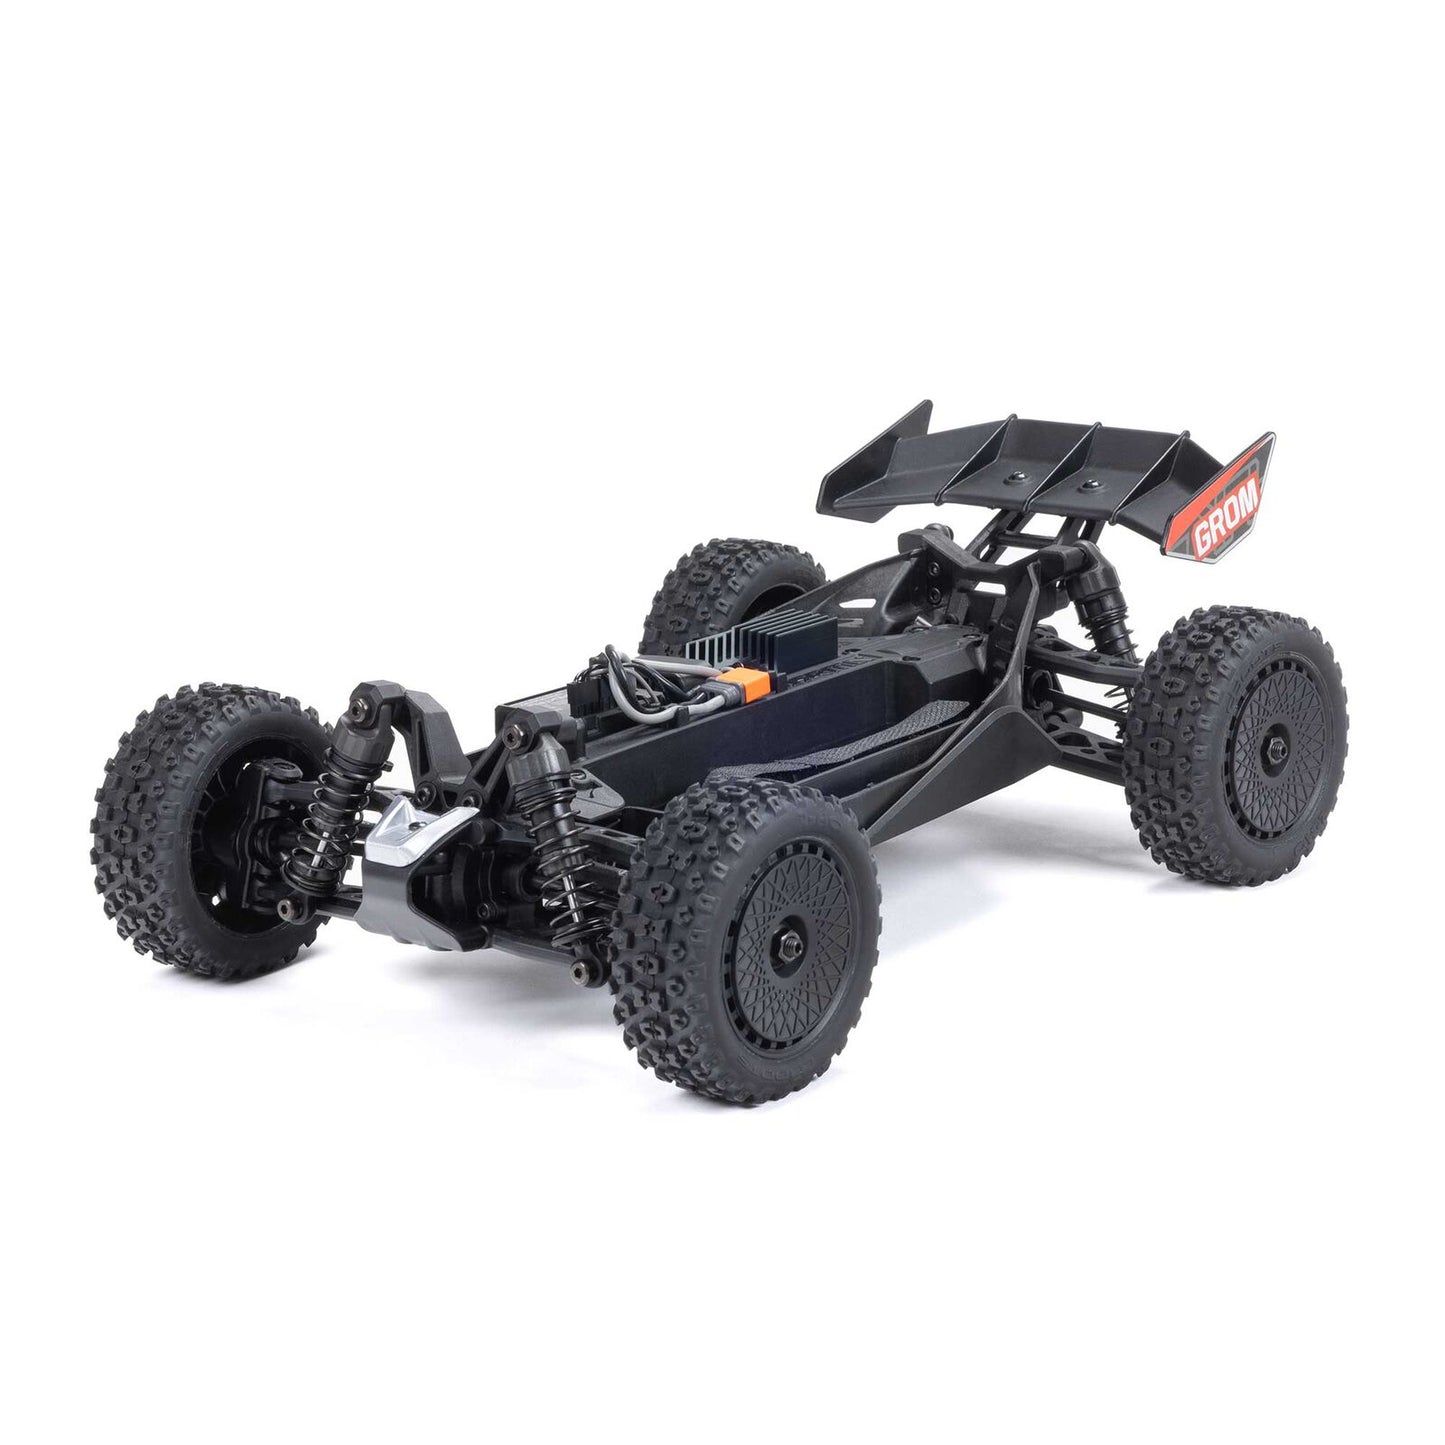 ARRMA TYPHON GROM MEGA 380 Brushed 4X4 Small Scale Buggy RTR with Battery & Charger, Blue/Silver